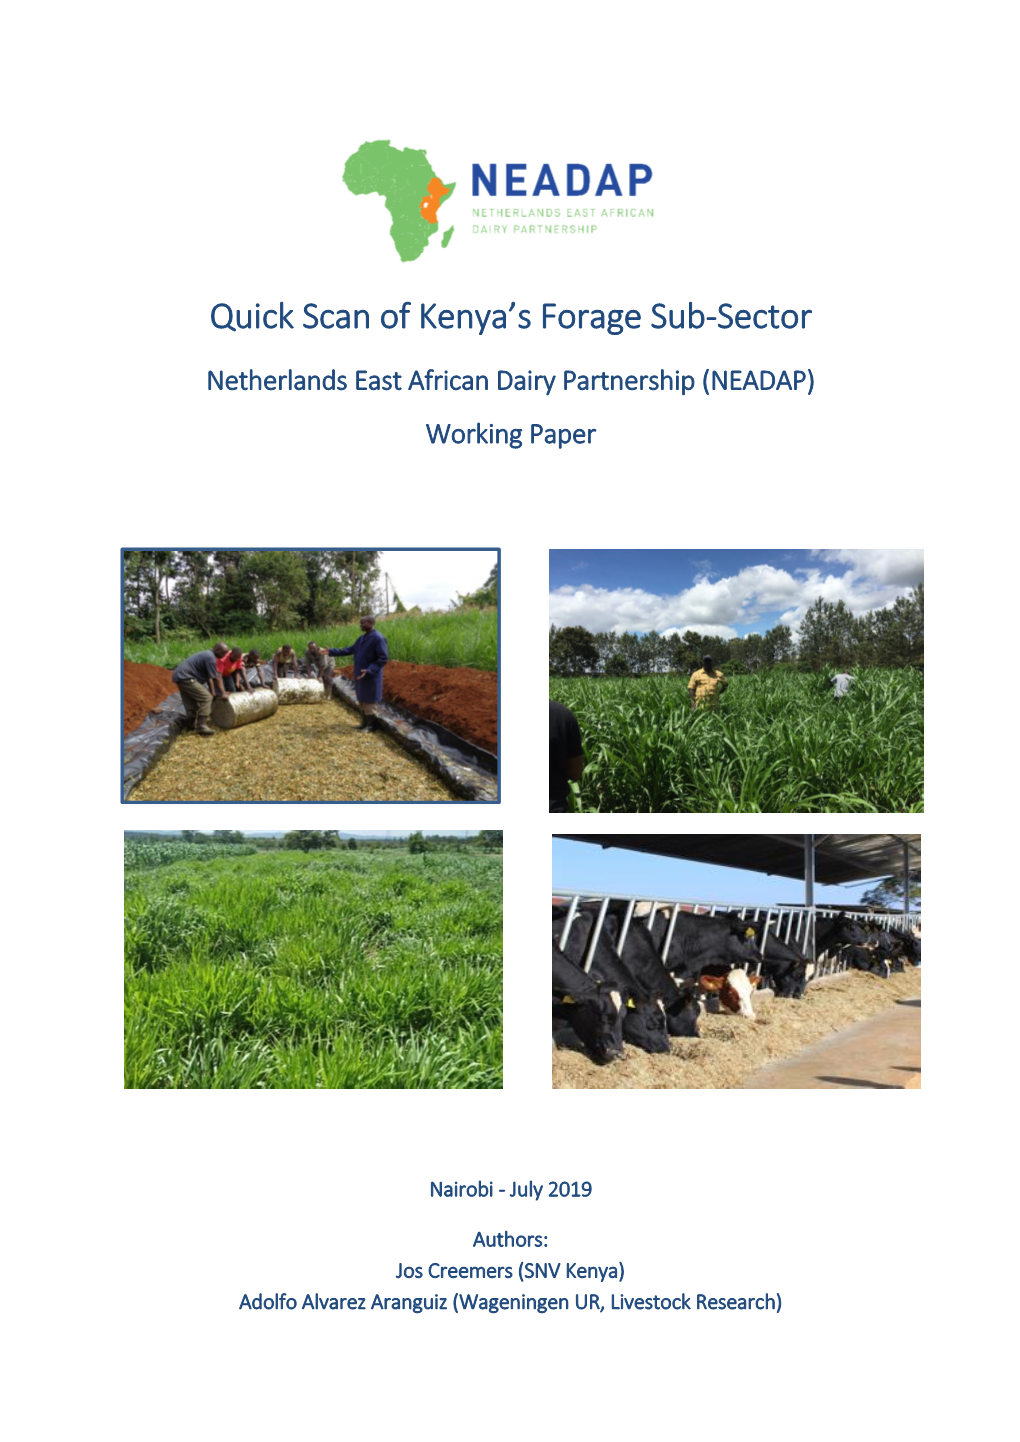 Quick Scan of Kenya's Forage Sub-Sector